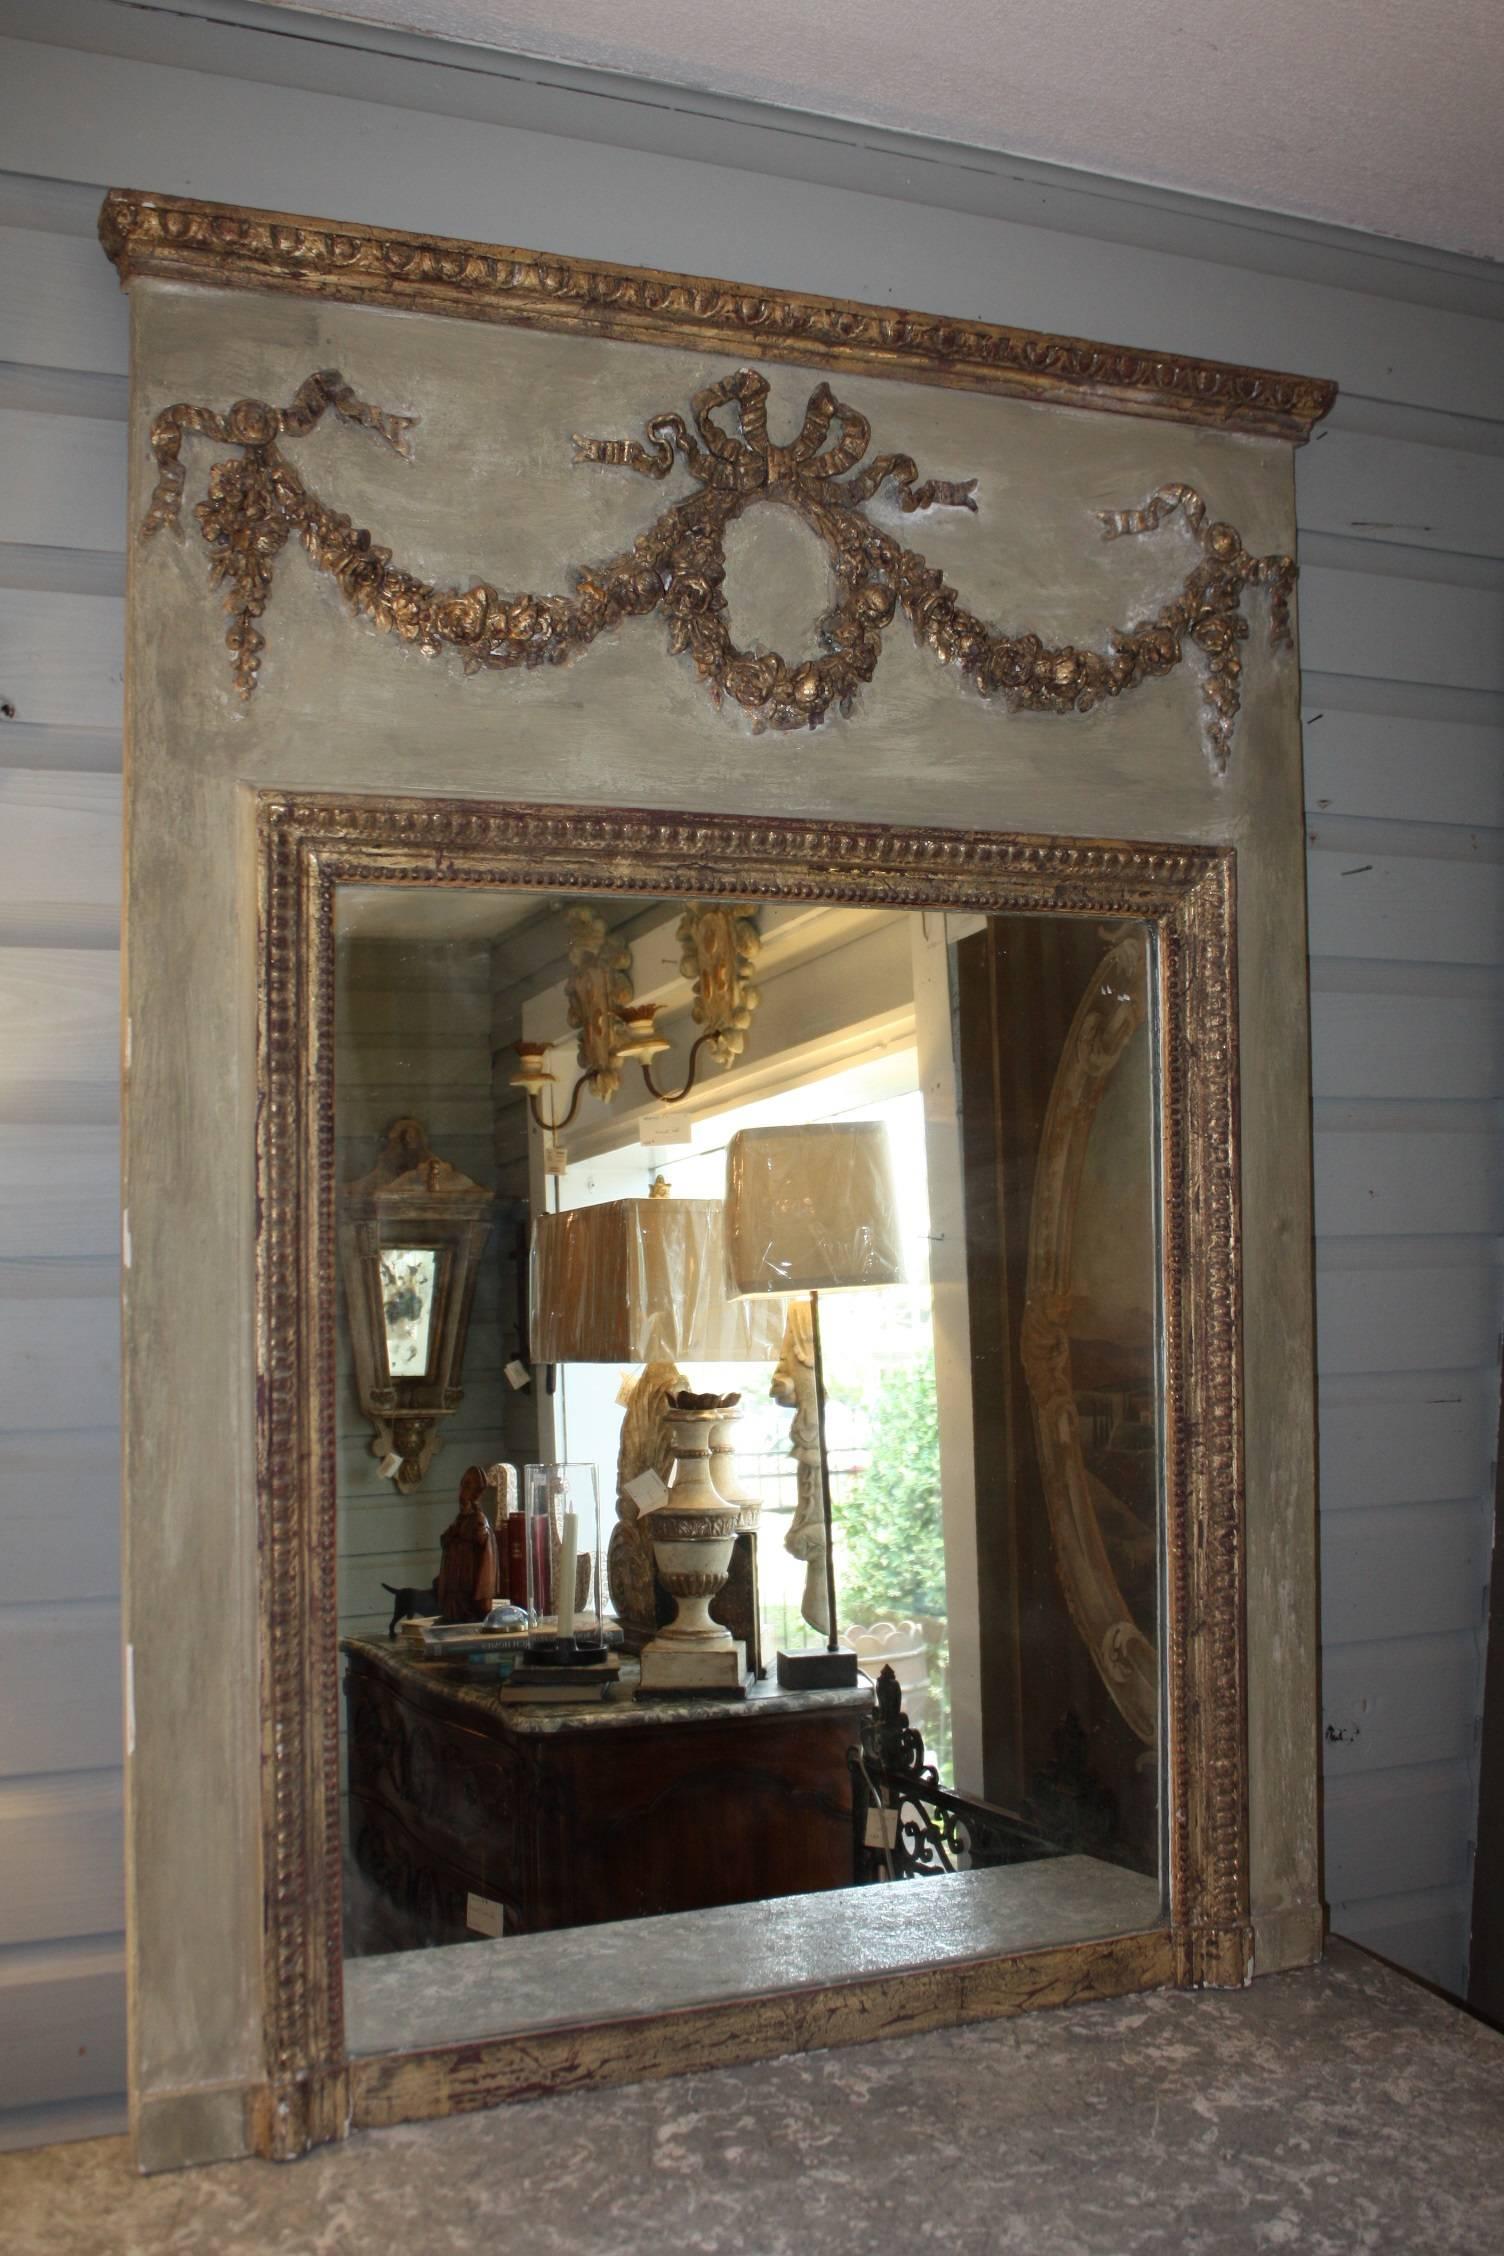 Beautiful 19th century French trumeau mirror painted in a light green/gray with gilded swag and ribbons.